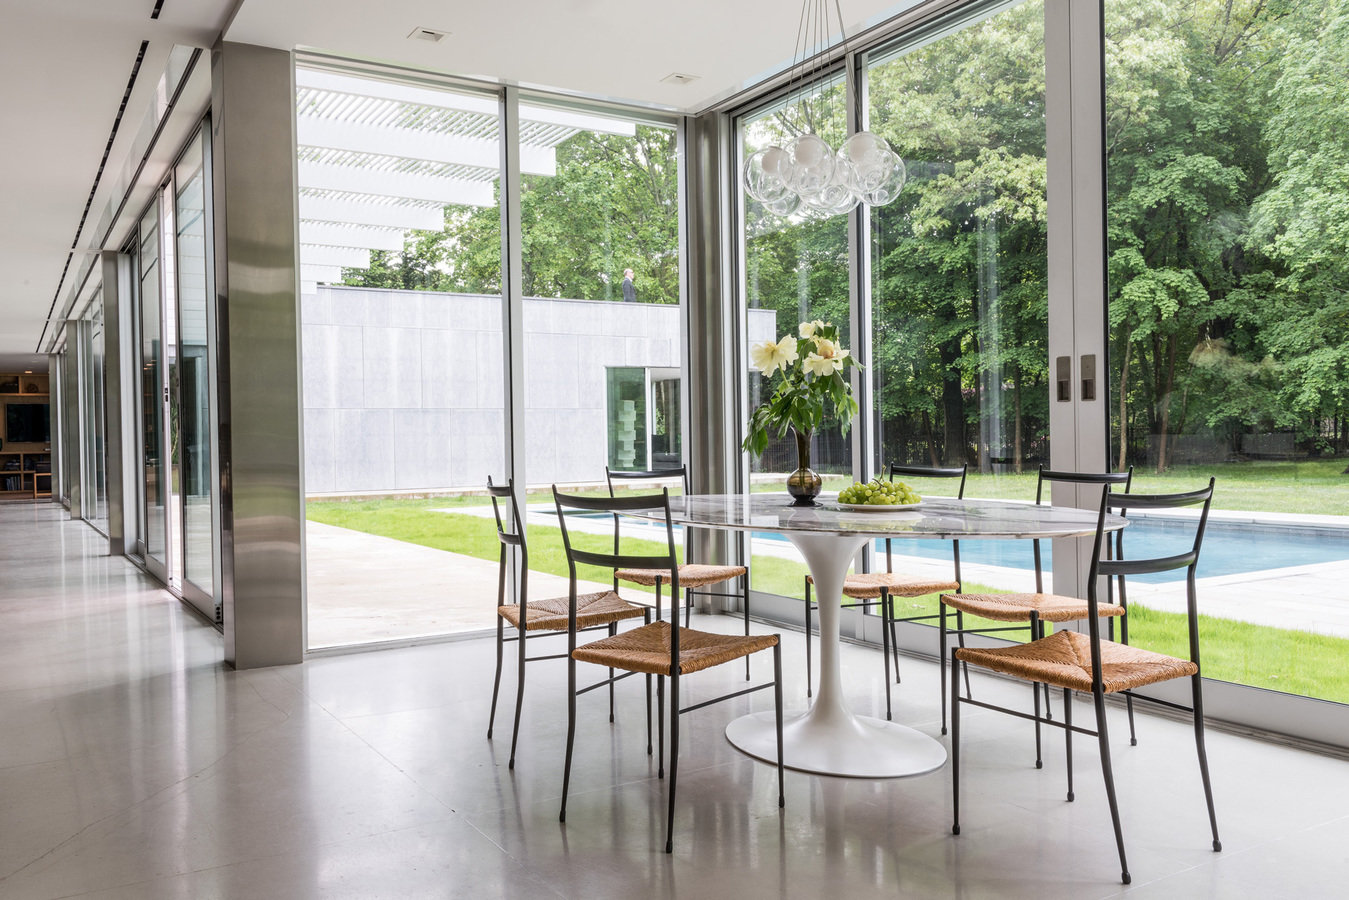 Glass-walled room with white Saarinen table with metal and rattan chairs, glass globe chandelier, view to pool in backyard.